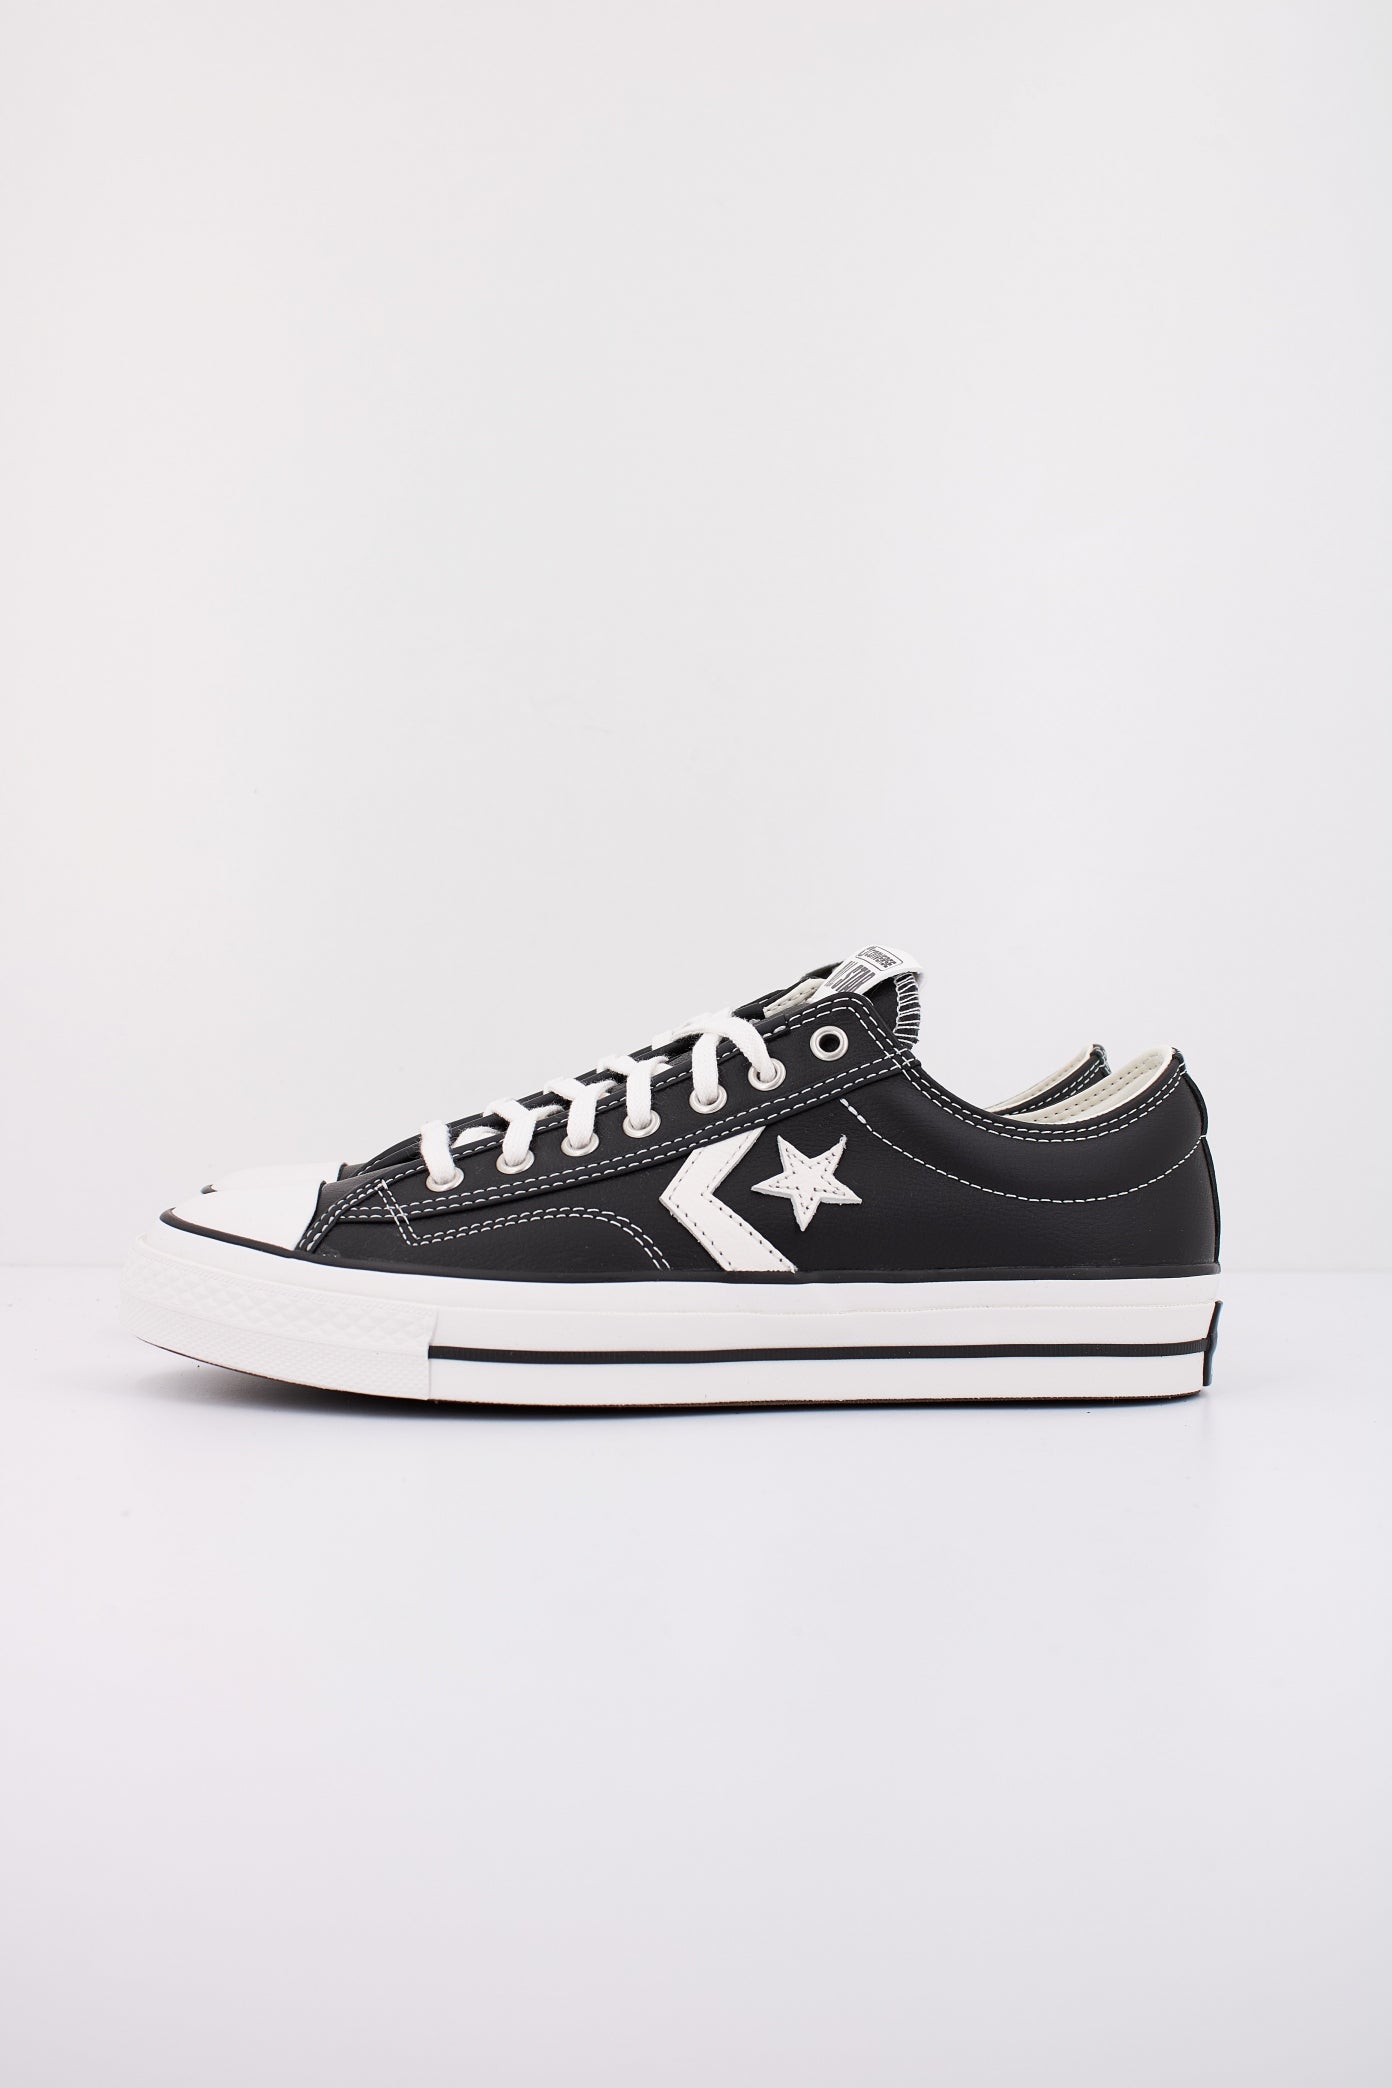 CONVERSE STAR PLAYER  FALL LEATHER en color NEGRO  (1)